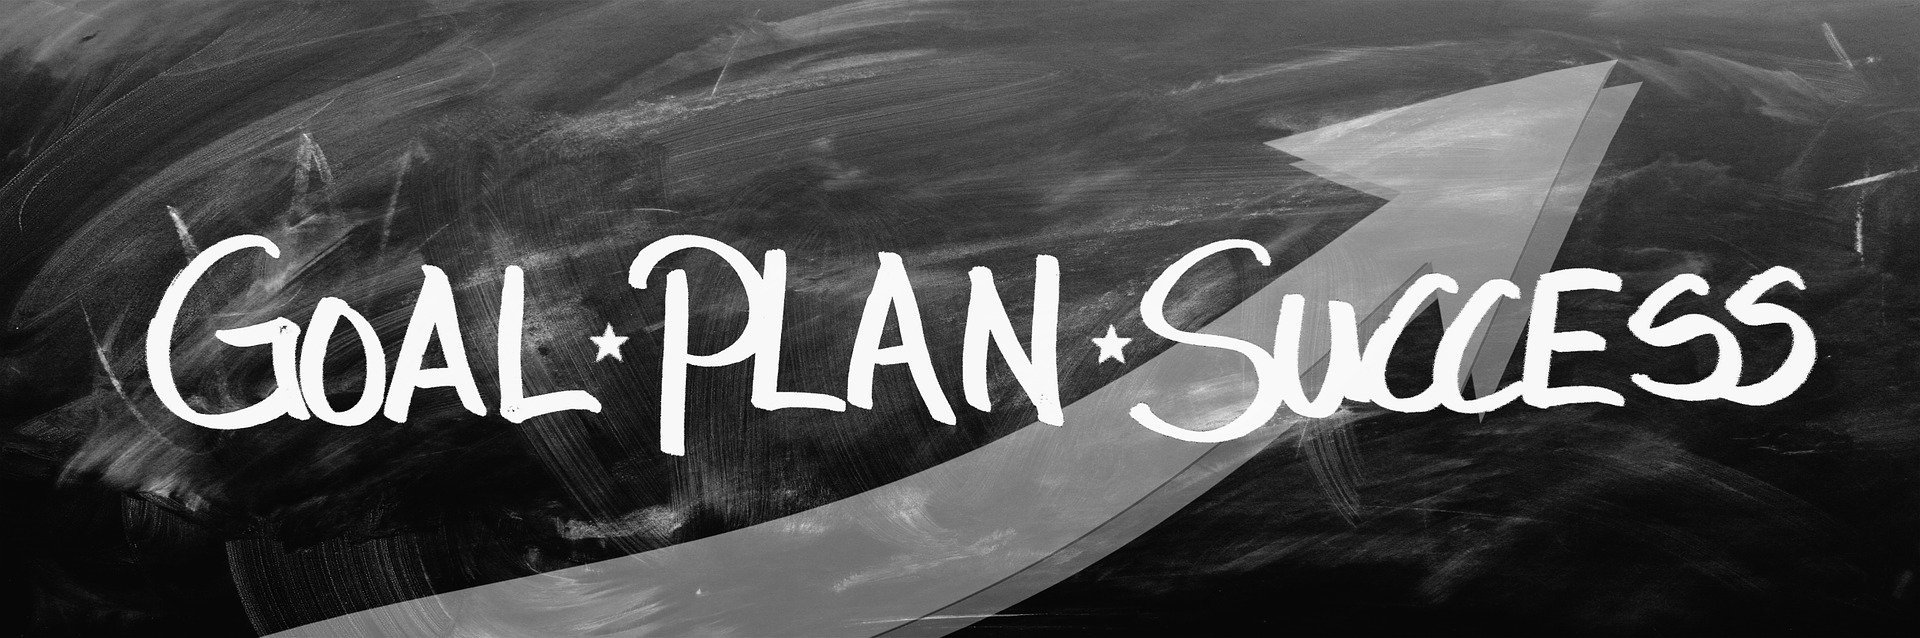 Planning for success image 